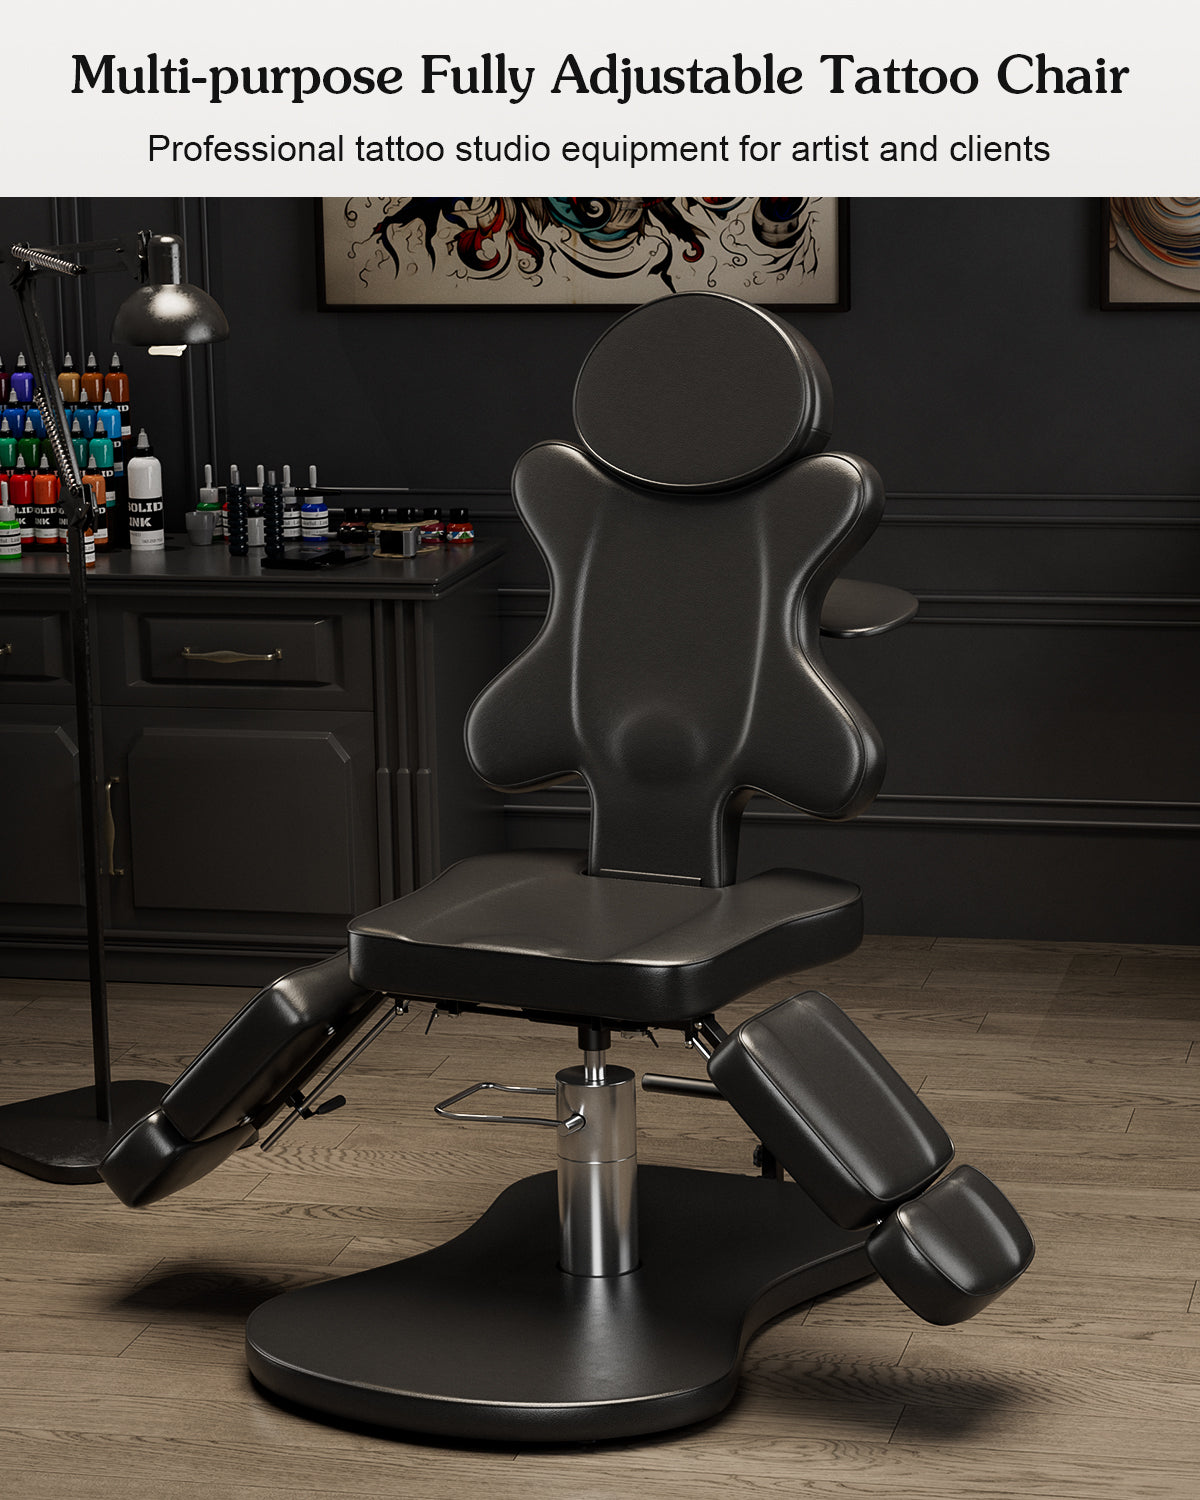 Multi-Purpose Hydraulic Tattoo Chair Split Legs for Artist, 360° Swivel, Height Adjustable, Angle Freely Adjustable, Specially Designed